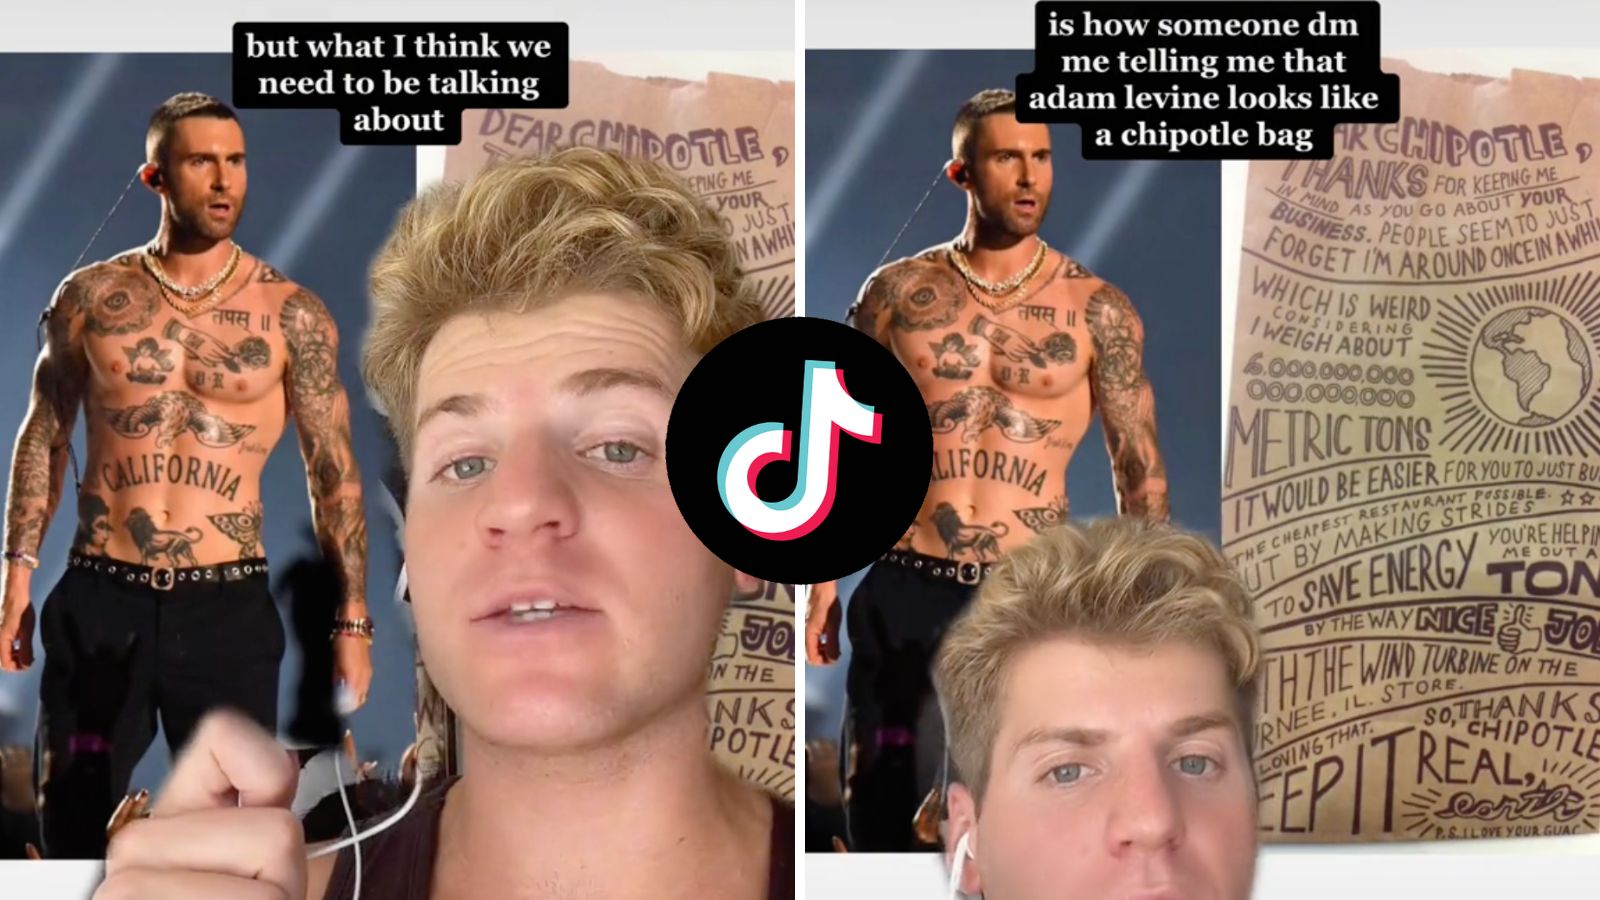 Viral TikTok compares Adam Levine to Chipotle bag: “They could be twins” -  Dexerto